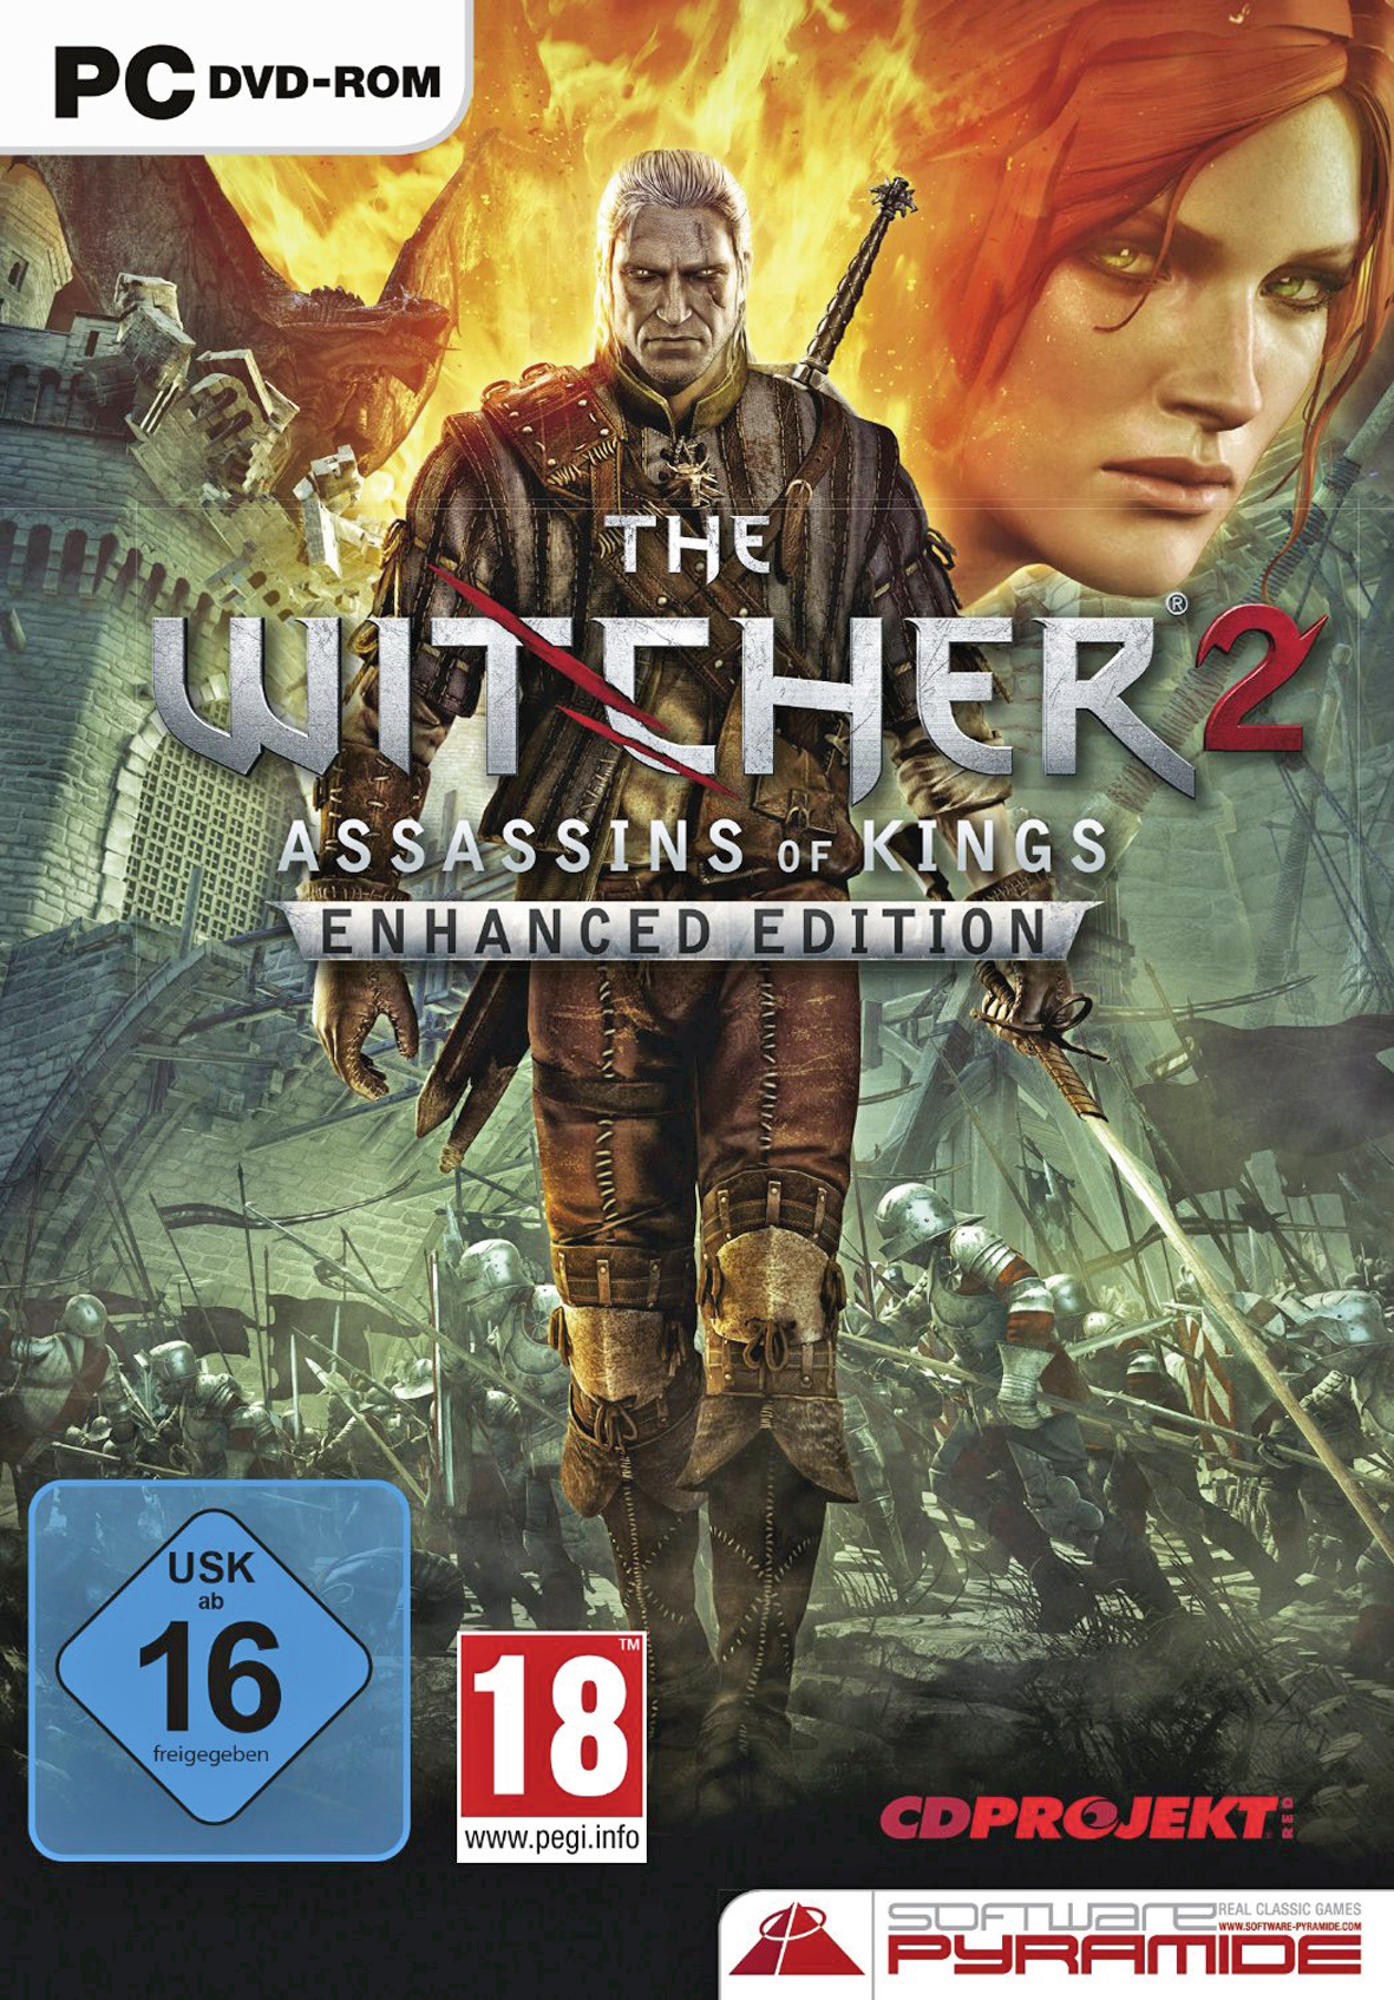 The 2 [PC] Assassins of Kings - Witcher -